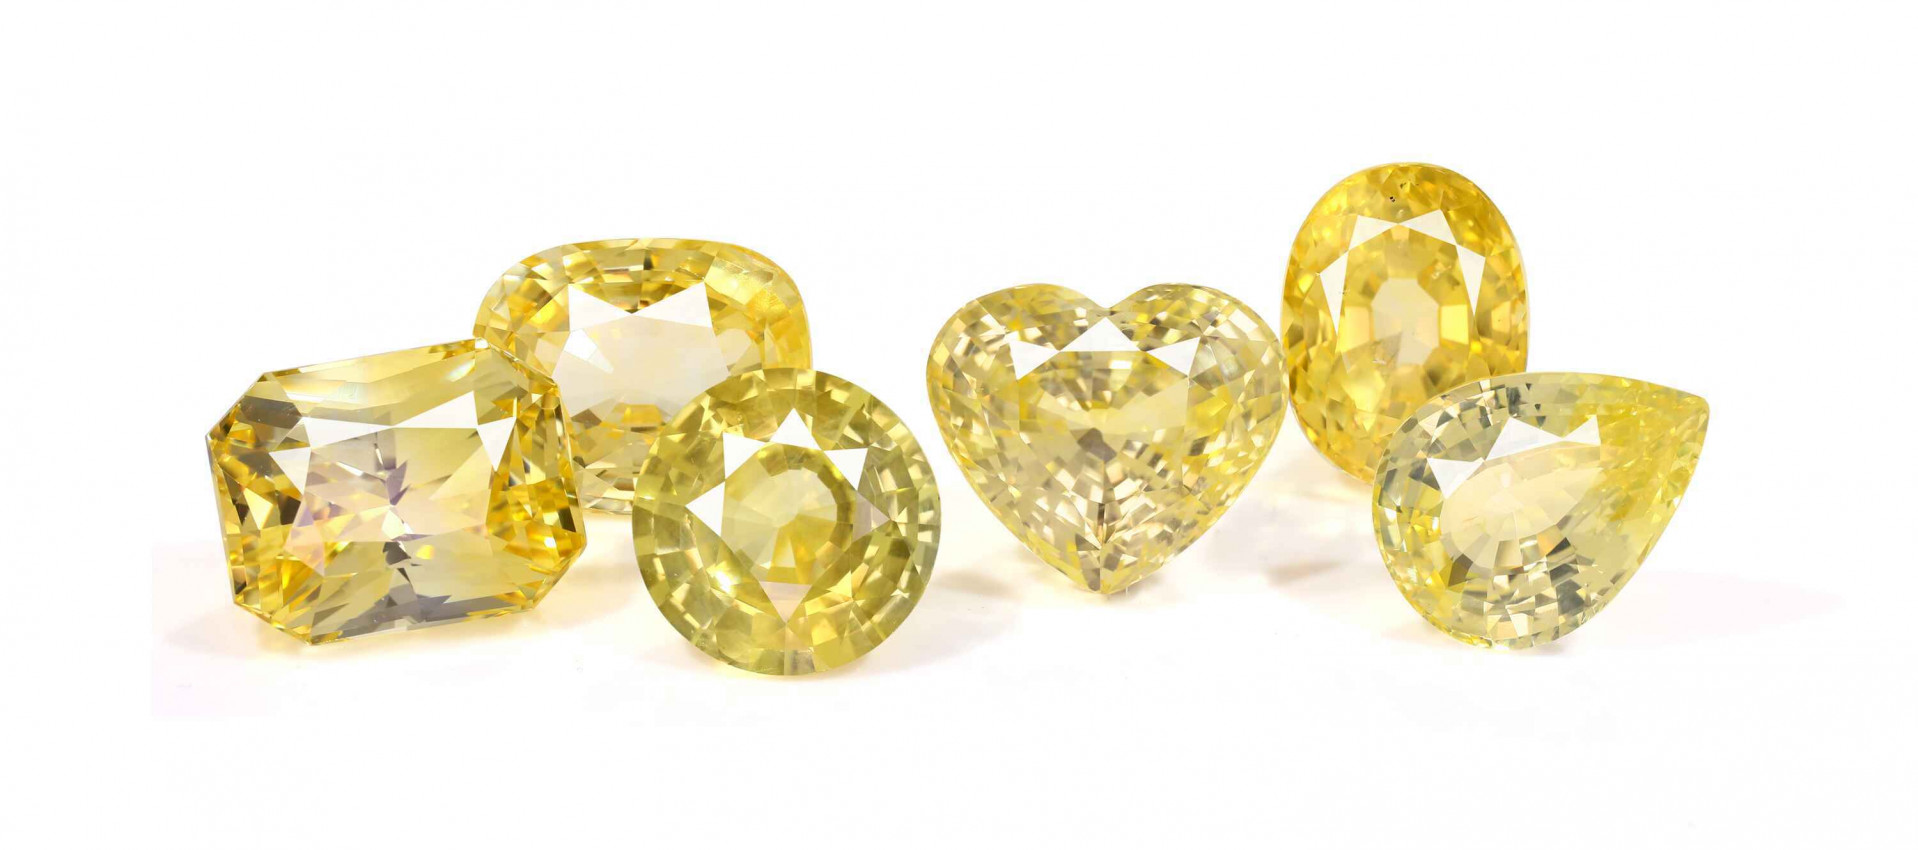 Which Metal is Best for Yellow Sapphire?